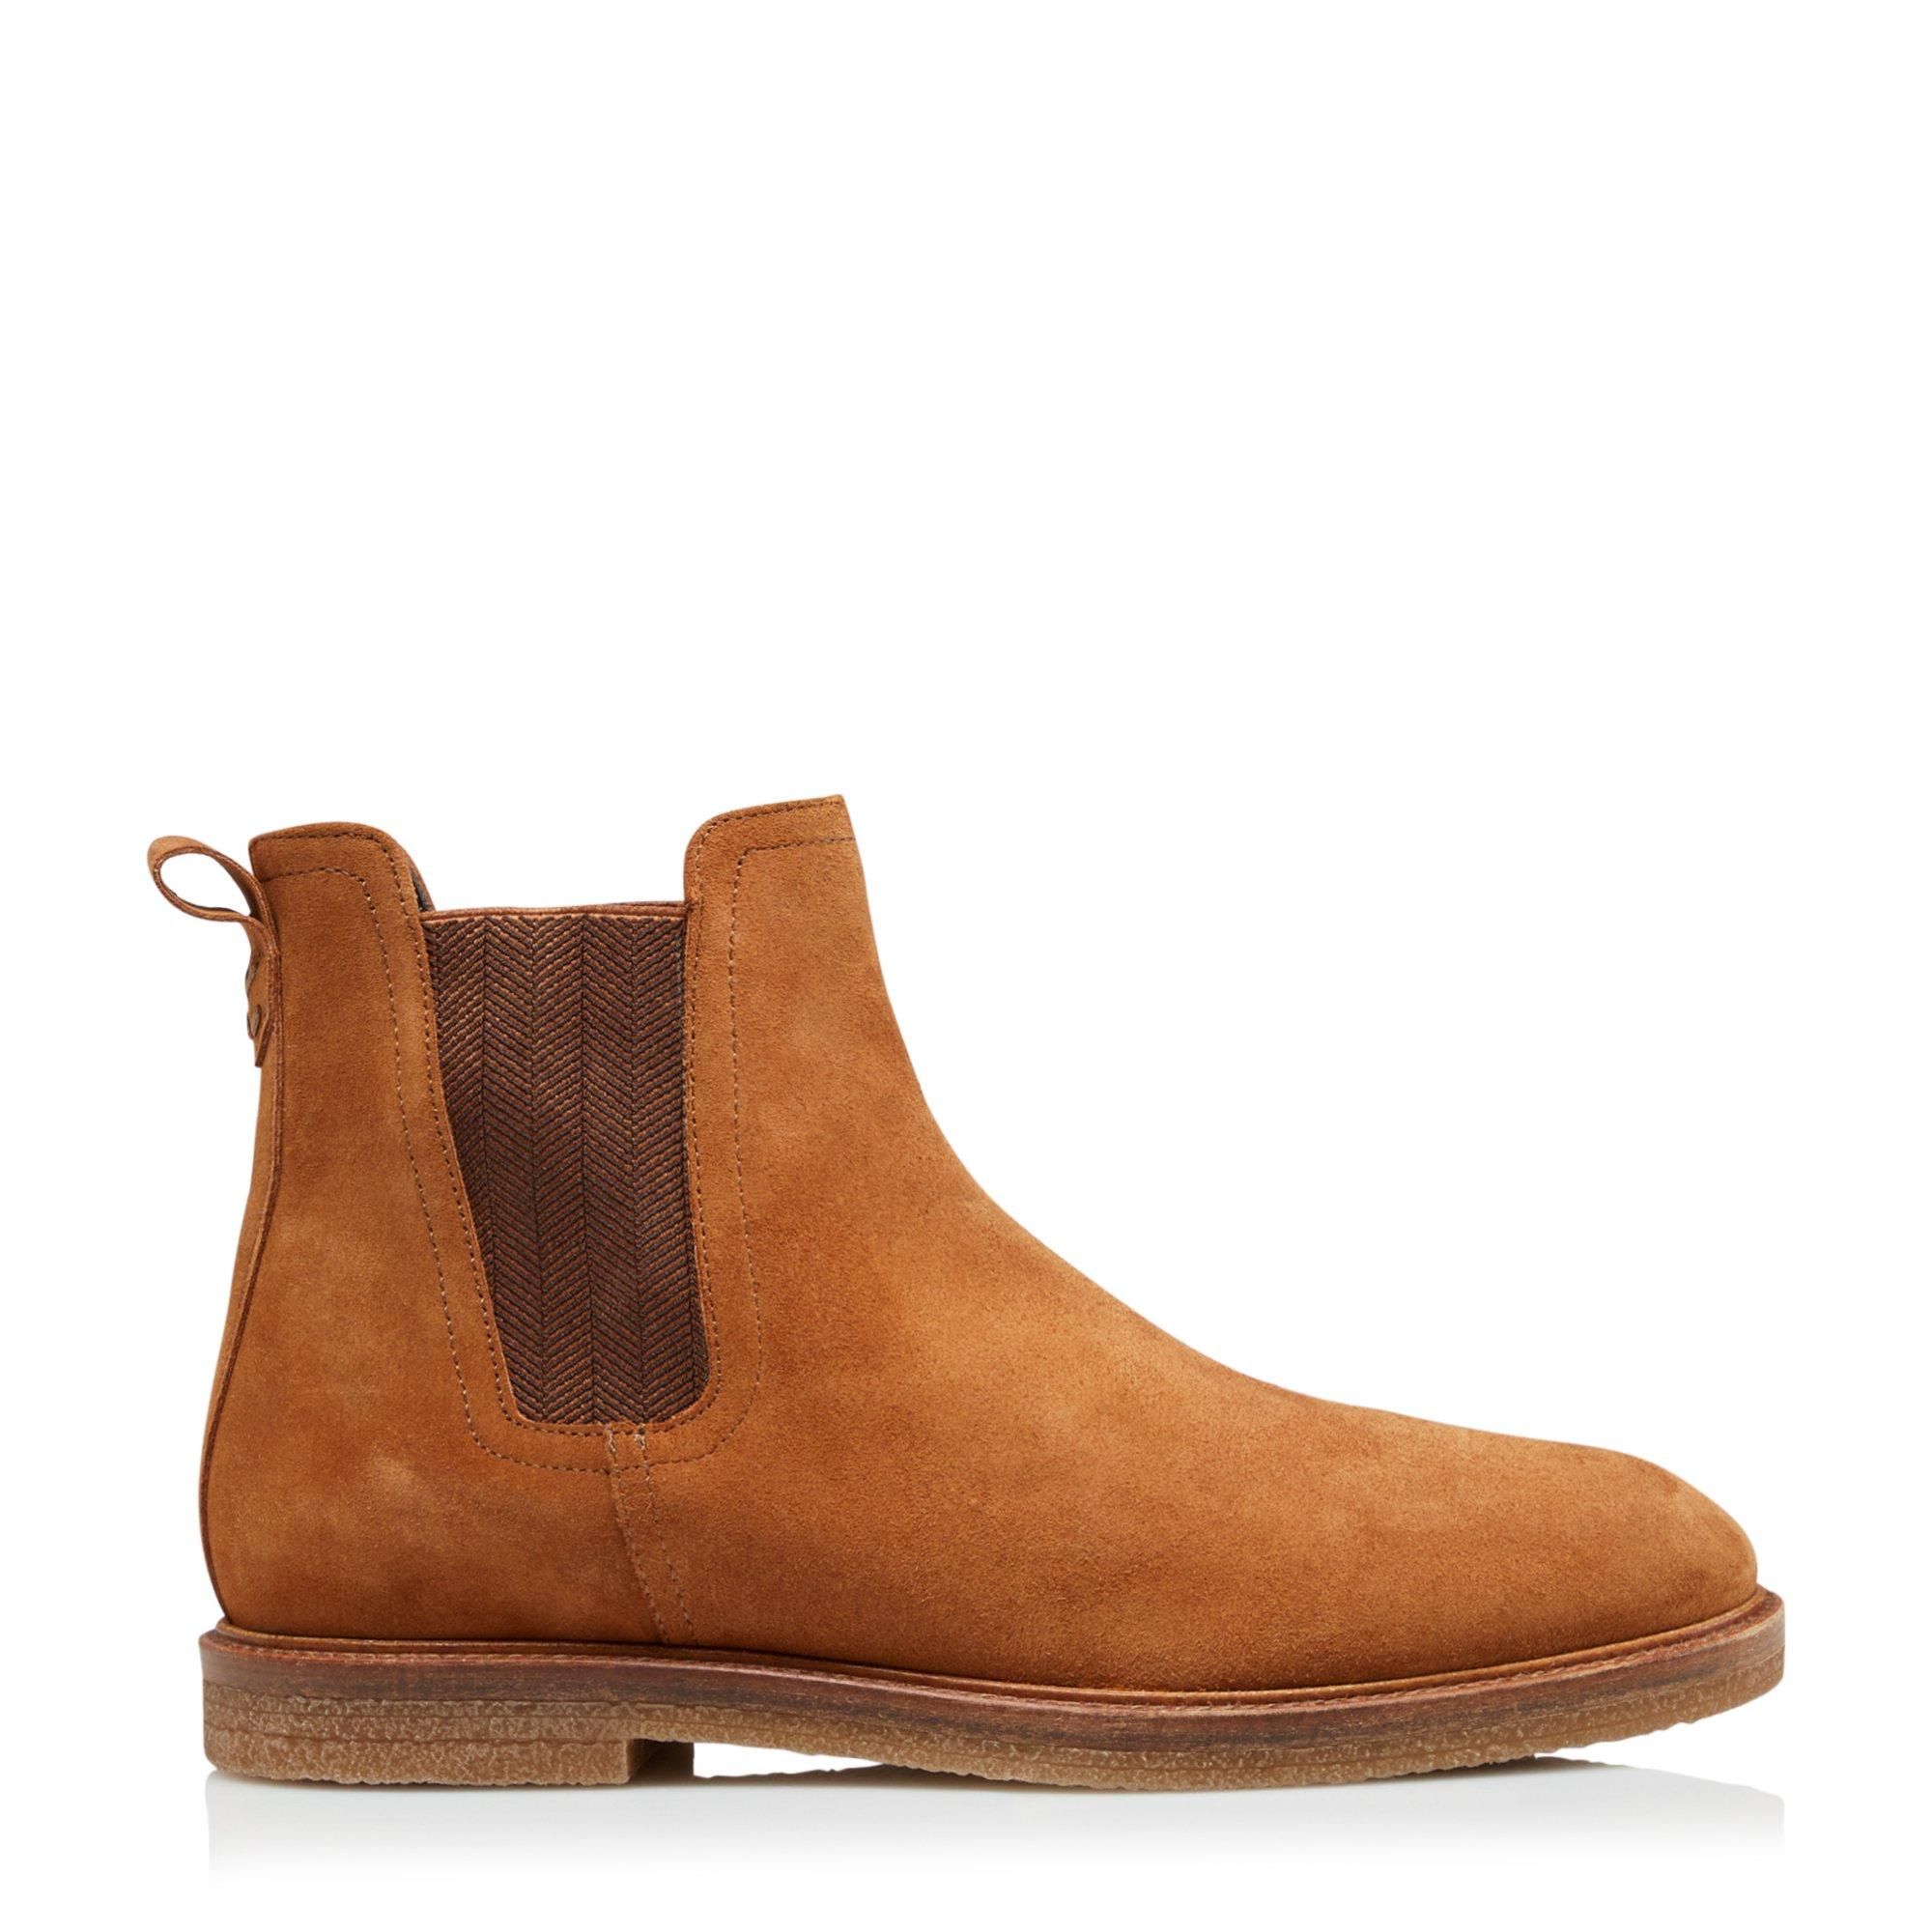 The traditional staple chelsea boots from Dune London. Showcasing a sturdy sole, elasticated panels and a rounded toe. Finished with a back pull up tab for ease.